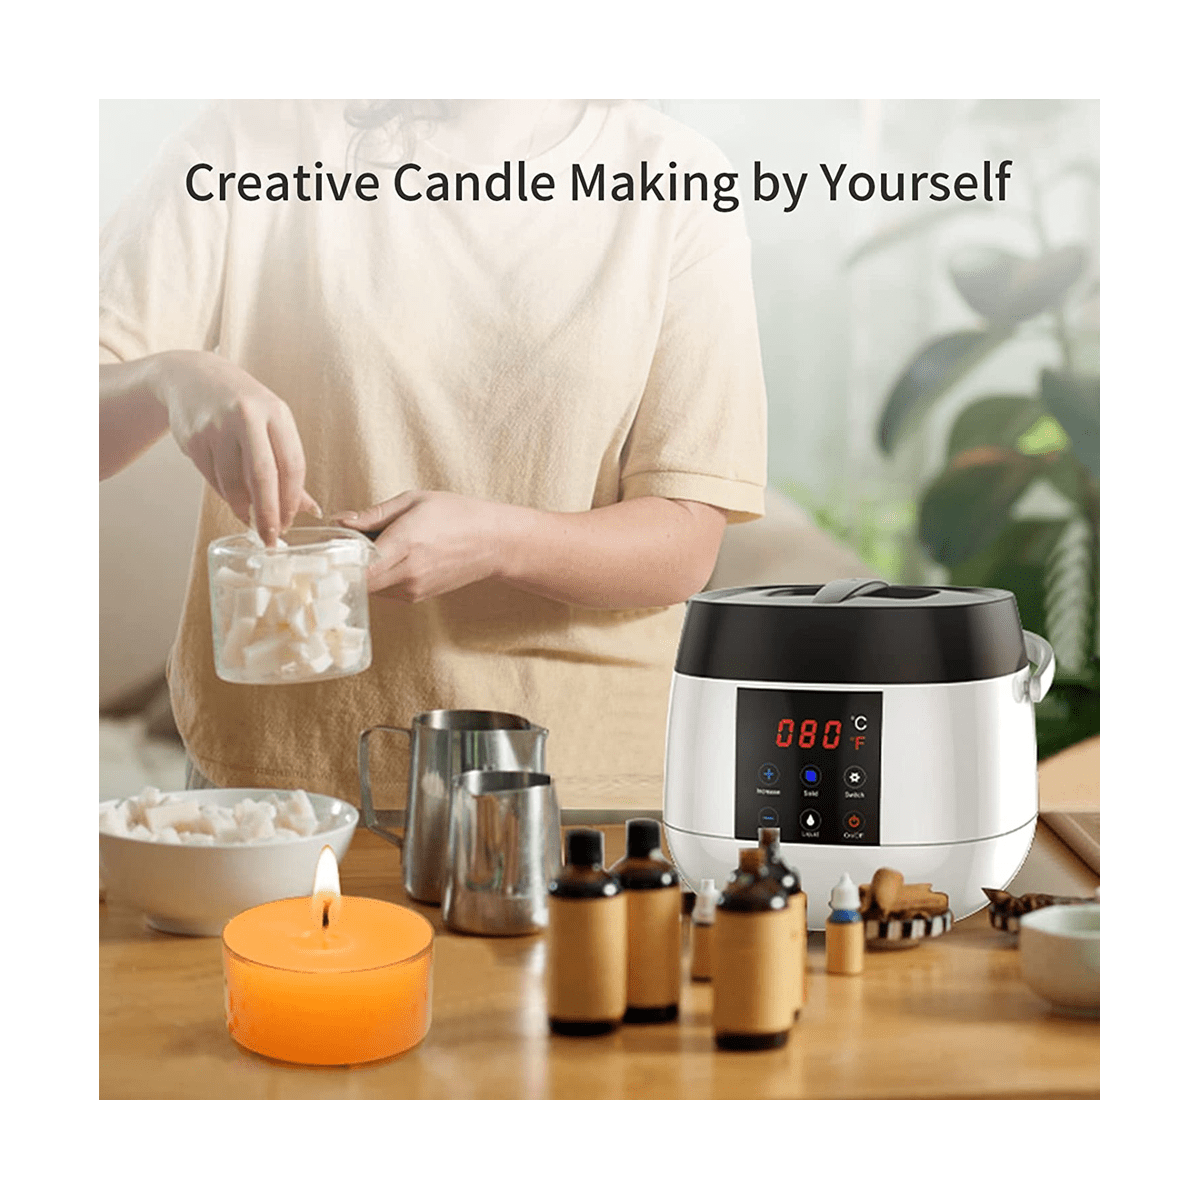 Candle Making Wax Melting Pot,Wax Melter for Candle Making,LED Temperature  Display for Adults Beginner,Soy Wax US Plug 